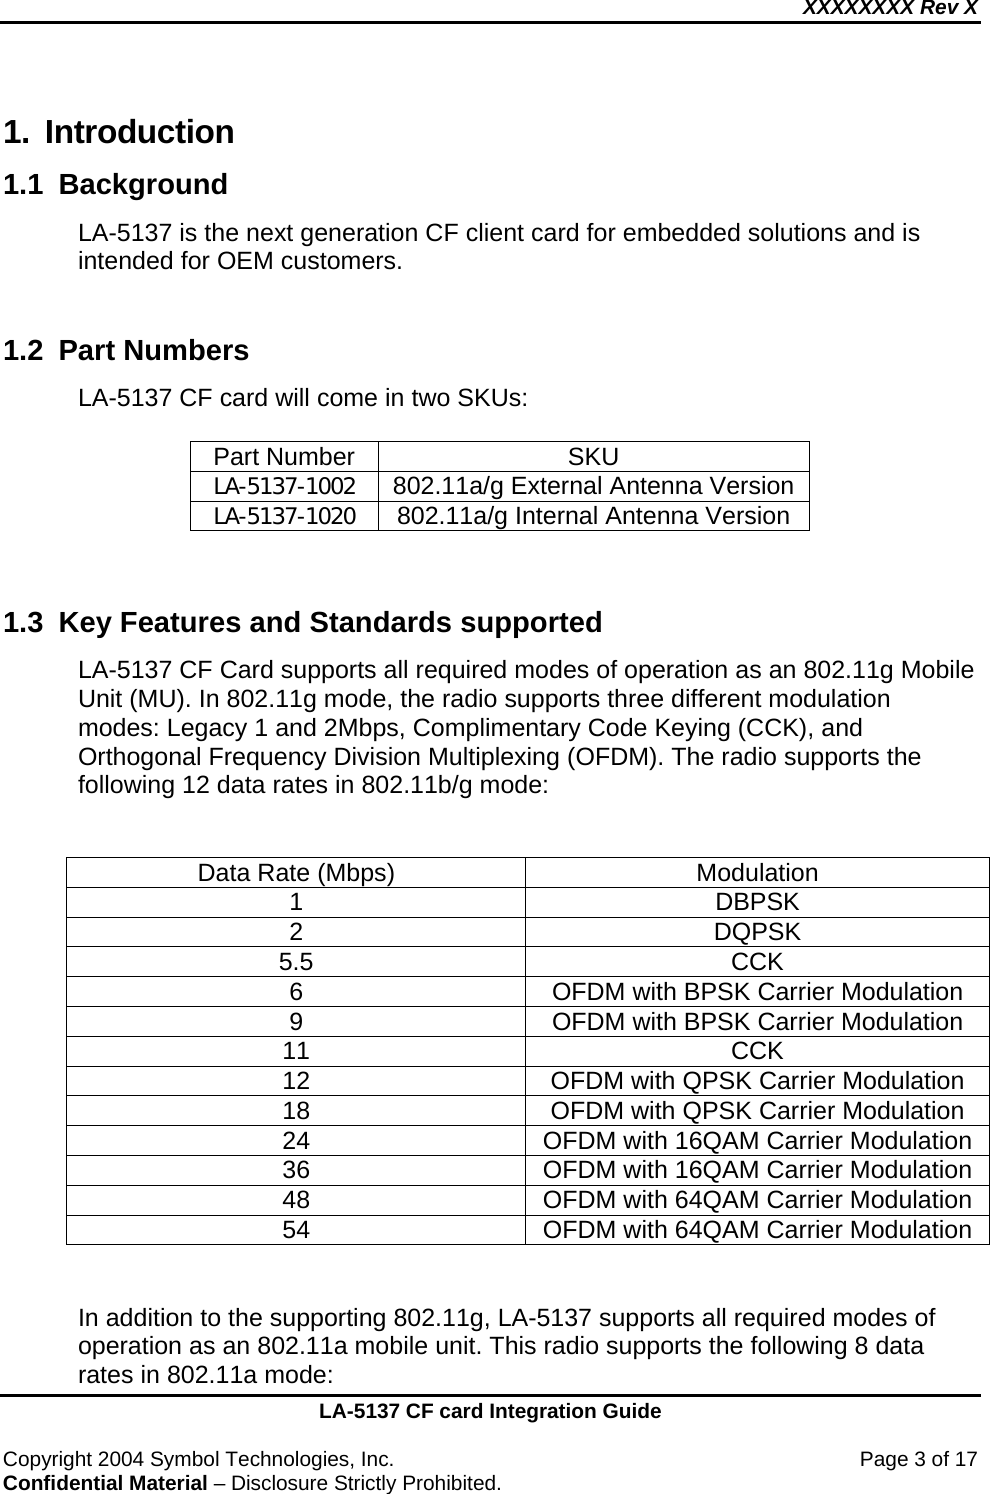 XXXXXXXX Rev X    LA-5137 CF card Integration Guide  Copyright 2004 Symbol Technologies, Inc.    Page 3 of 17 Confidential Material – Disclosure Strictly Prohibited. 1. Introduction 1.1 Background  LA-5137 is the next generation CF client card for embedded solutions and is intended for OEM customers.  1.2  Part Numbers  LA-5137 CF card will come in two SKUs:  Part Number  SKU LA-5137-1002  802.11a/g External Antenna Version LA-5137-1020  802.11a/g Internal Antenna Version   1.3  Key Features and Standards supported LA-5137 CF Card supports all required modes of operation as an 802.11g Mobile Unit (MU). In 802.11g mode, the radio supports three different modulation modes: Legacy 1 and 2Mbps, Complimentary Code Keying (CCK), and Orthogonal Frequency Division Multiplexing (OFDM). The radio supports the following 12 data rates in 802.11b/g mode:   Data Rate (Mbps)  Modulation 1 DBPSK 2 DQPSK 5.5 CCK 6  OFDM with BPSK Carrier Modulation 9  OFDM with BPSK Carrier Modulation 11 CCK 12  OFDM with QPSK Carrier Modulation 18  OFDM with QPSK Carrier Modulation 24  OFDM with 16QAM Carrier Modulation 36  OFDM with 16QAM Carrier Modulation 48  OFDM with 64QAM Carrier Modulation 54  OFDM with 64QAM Carrier Modulation   In addition to the supporting 802.11g, LA-5137 supports all required modes of operation as an 802.11a mobile unit. This radio supports the following 8 data rates in 802.11a mode: 